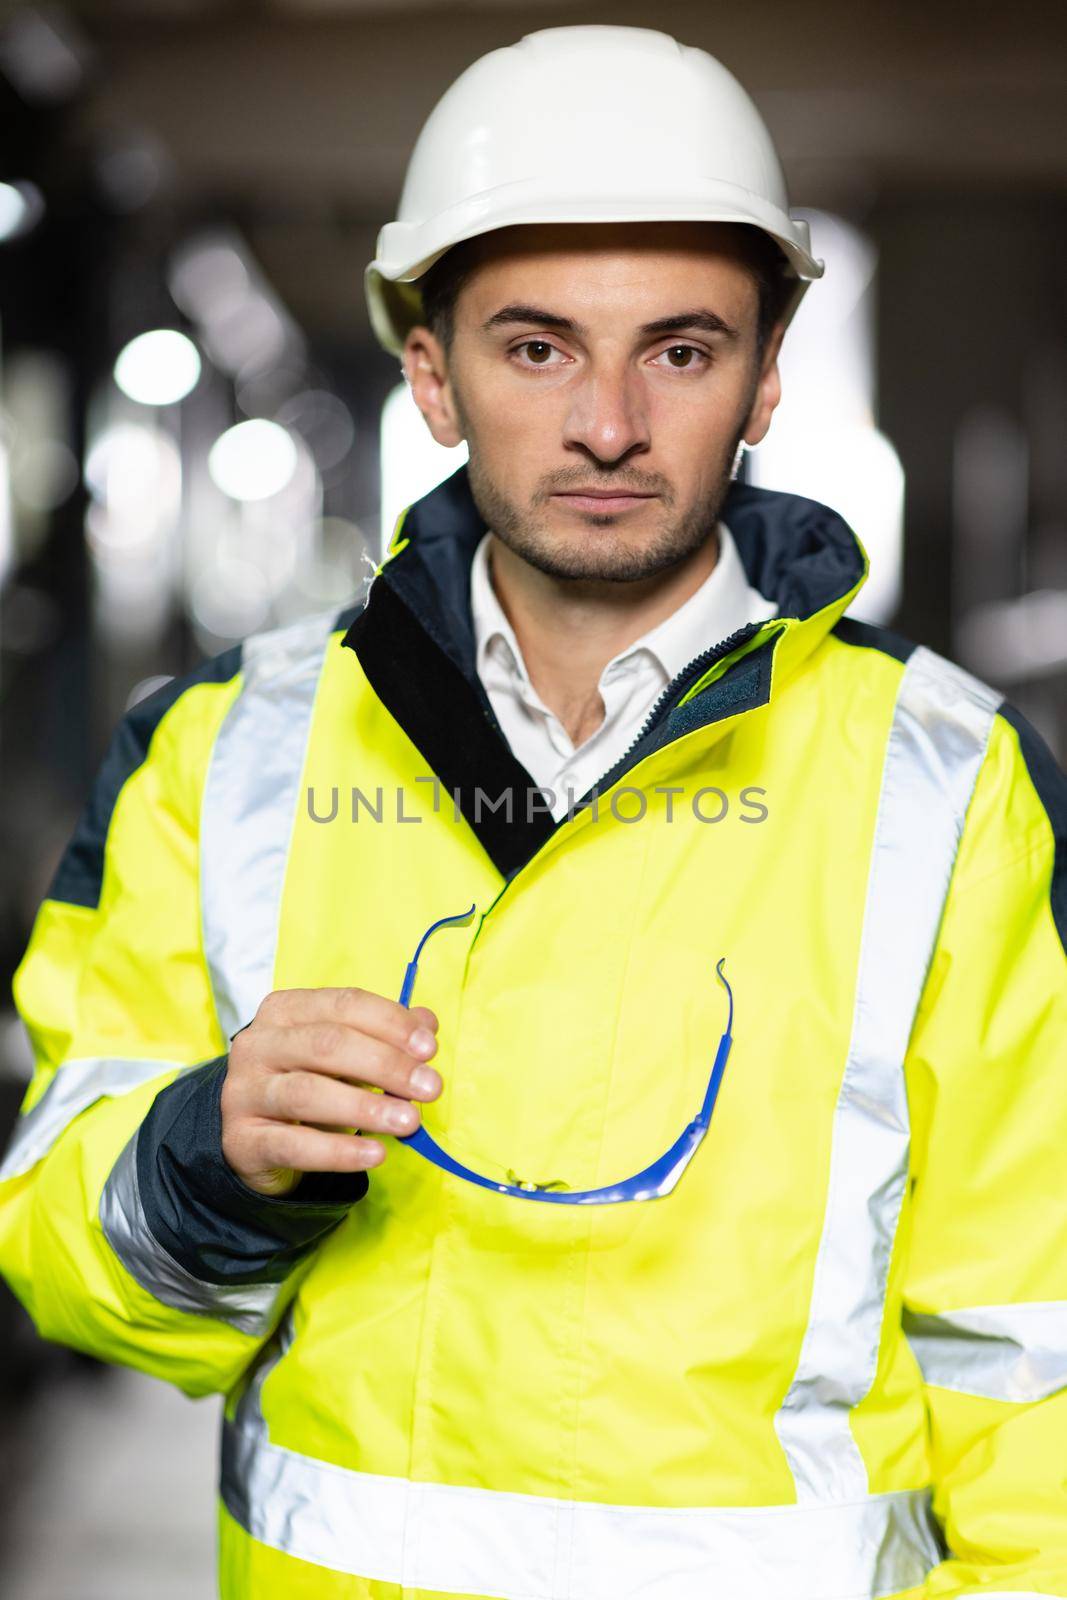 Professional Heavy Industry Engineer Worker Wearing Uniform, Glasses and Hard Hat in a Steel Factory Looks at Camera. Caucasian Industrial Specialist Standing in a Metal Construction Manufacture.